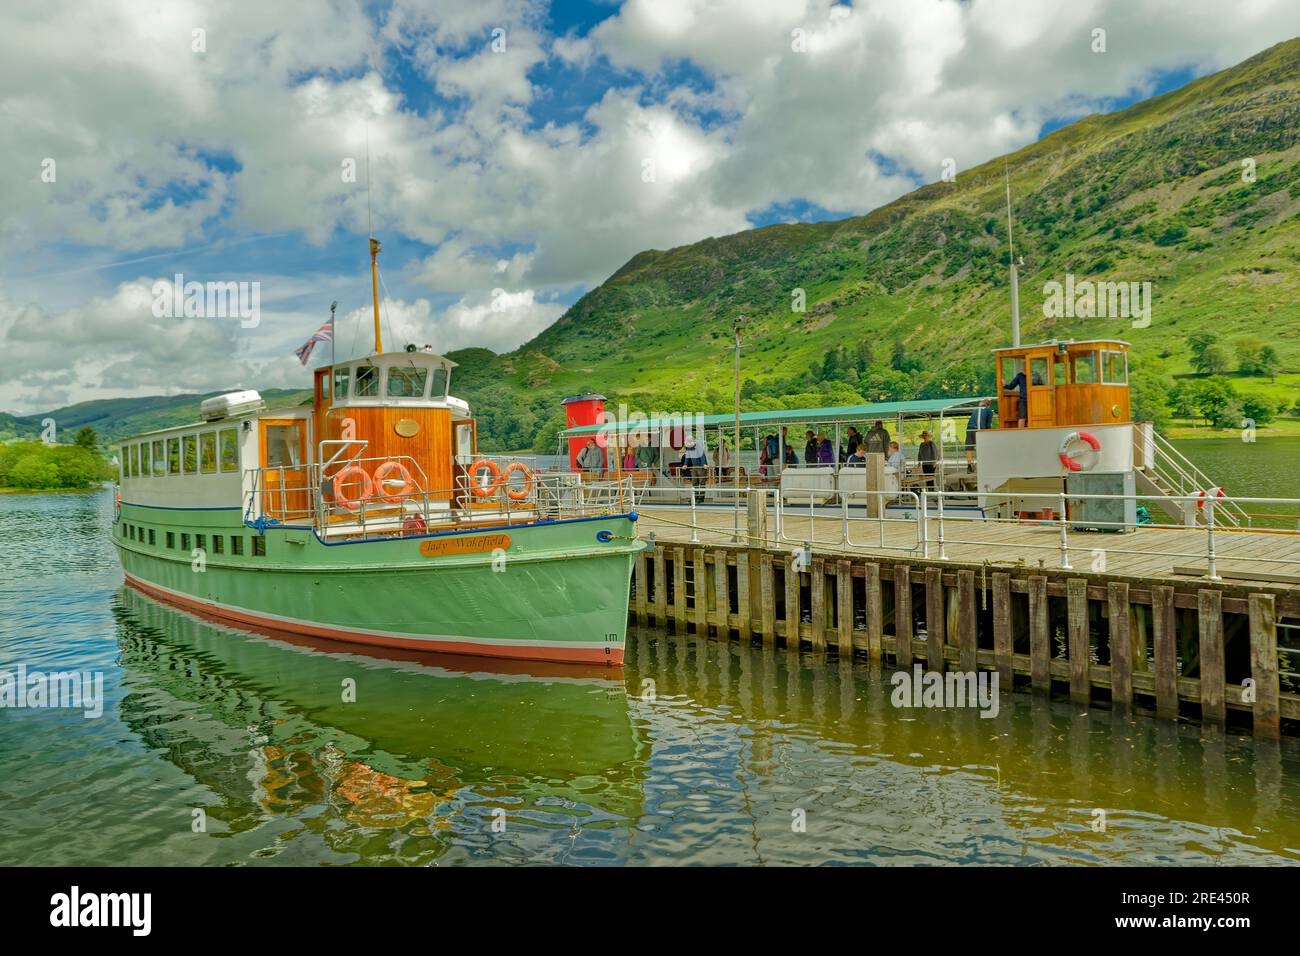 Ullswater cruise boat 'Lady Wakefield' at Glenridding Pier on Ullswater, Cumbria in England. Stock Photo